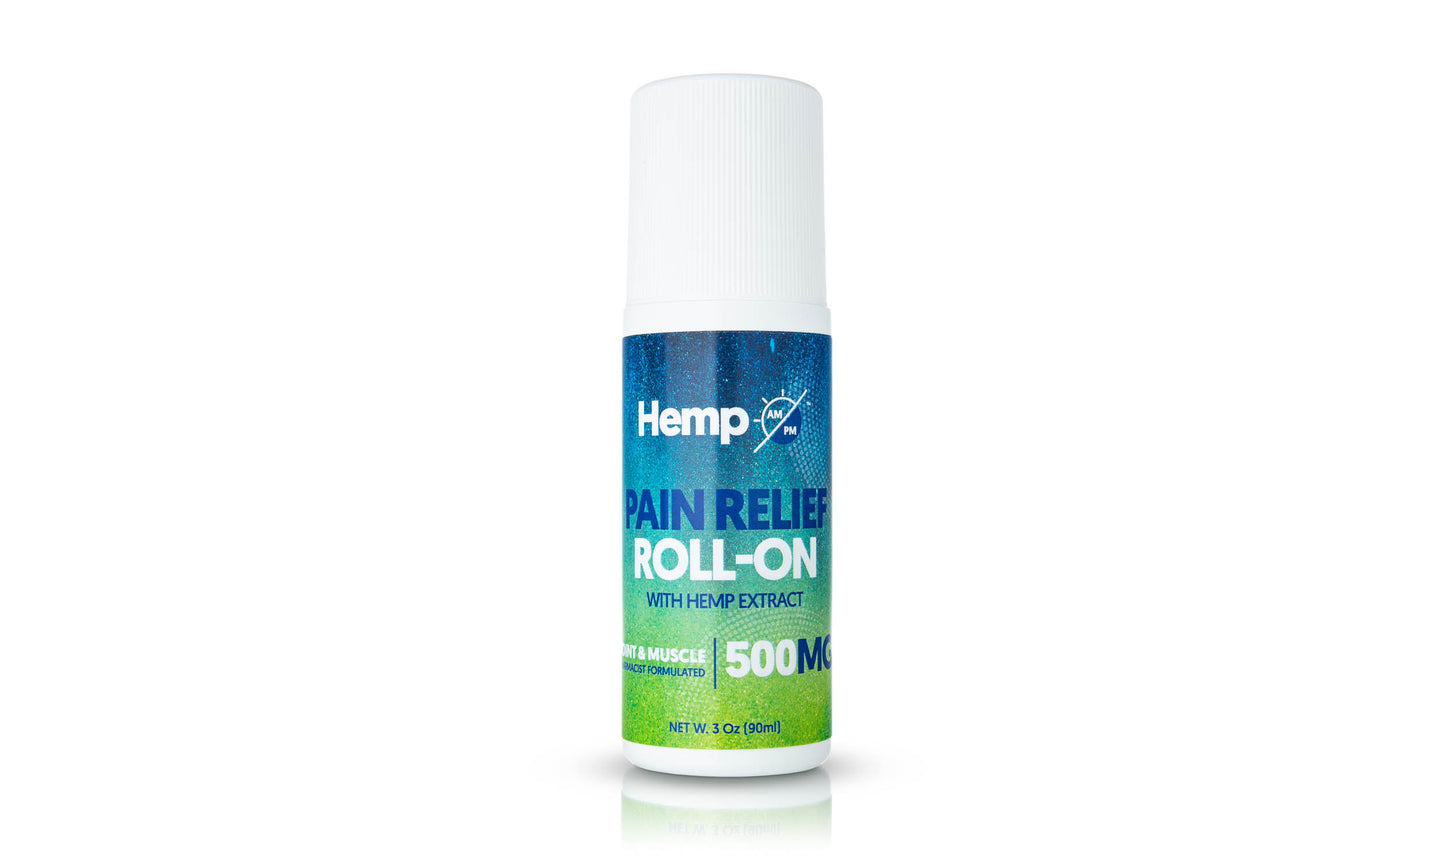 Hemp AM PM Pain Relief Roll-ons